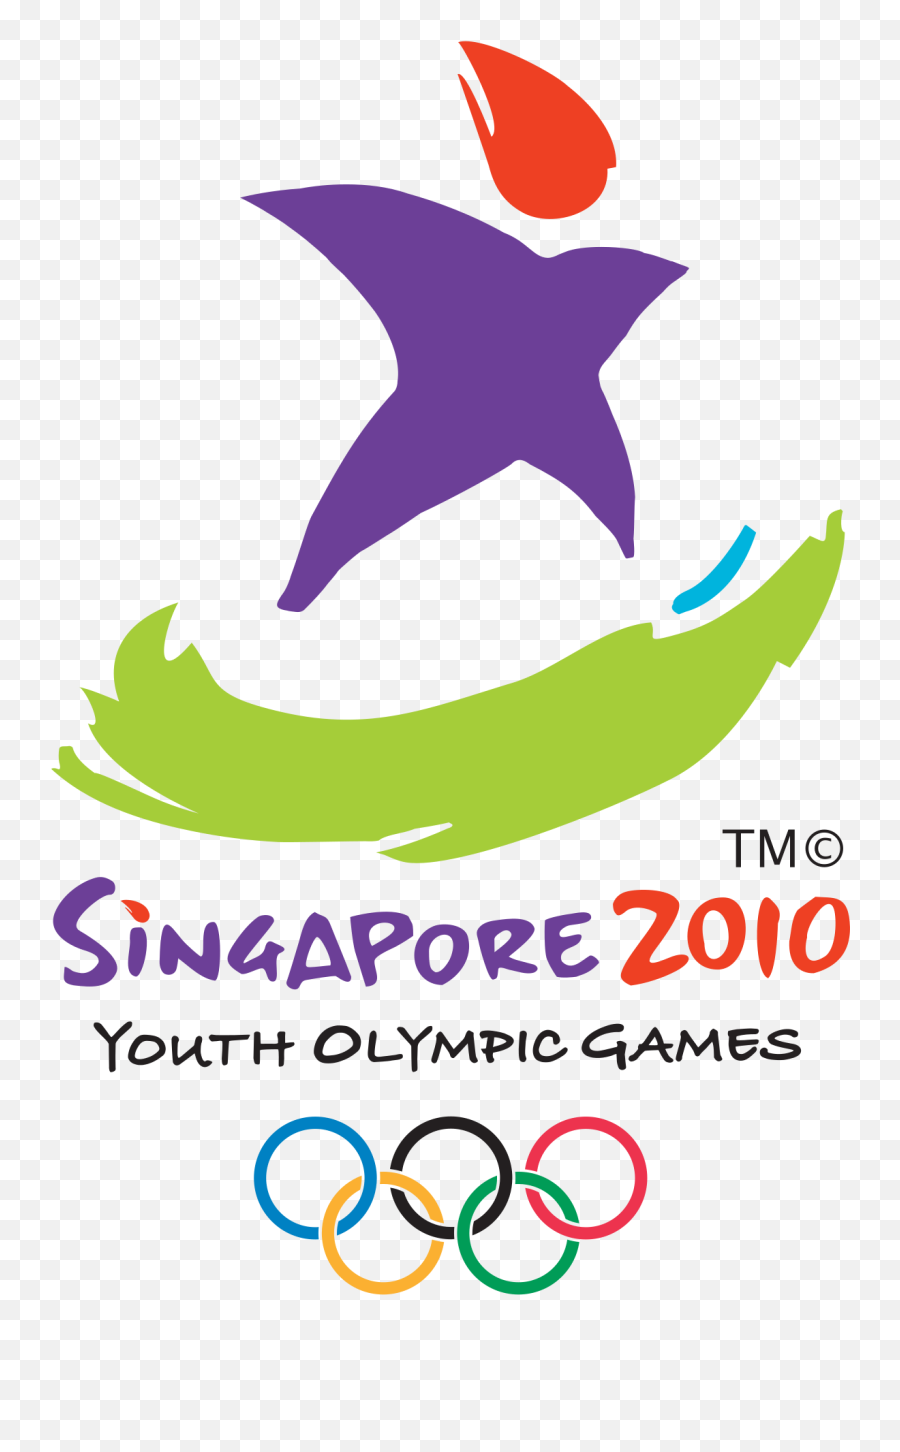 2010 Summer Youth Olympics - Wikipedia Youth Olympic Games Singapore Png,30 Seconds To Mars Logos